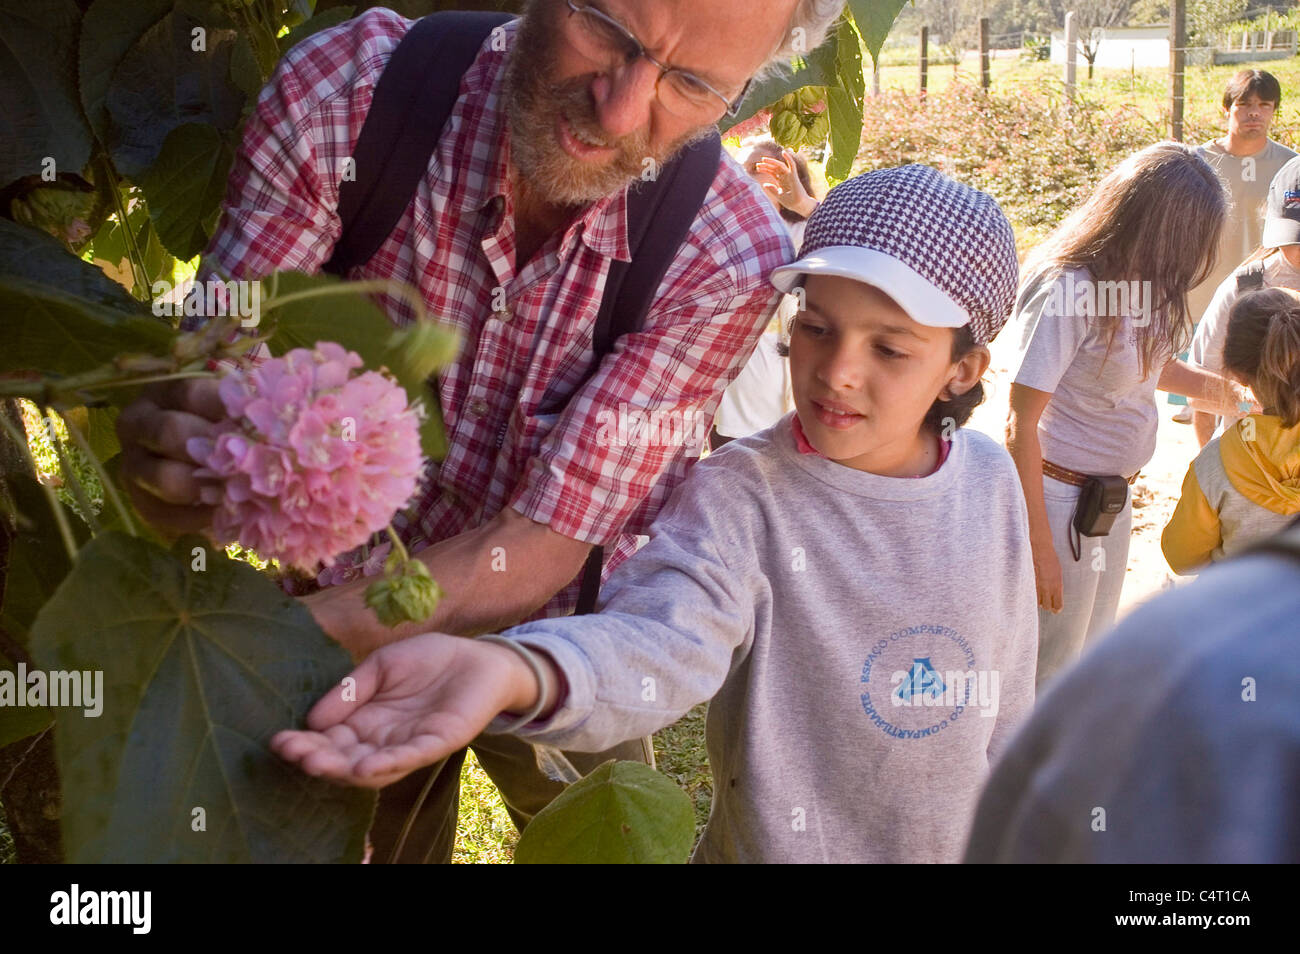 Environmental education for children Gathering seeds for planting. Families spending time together, outdoor recreation Stock Photo